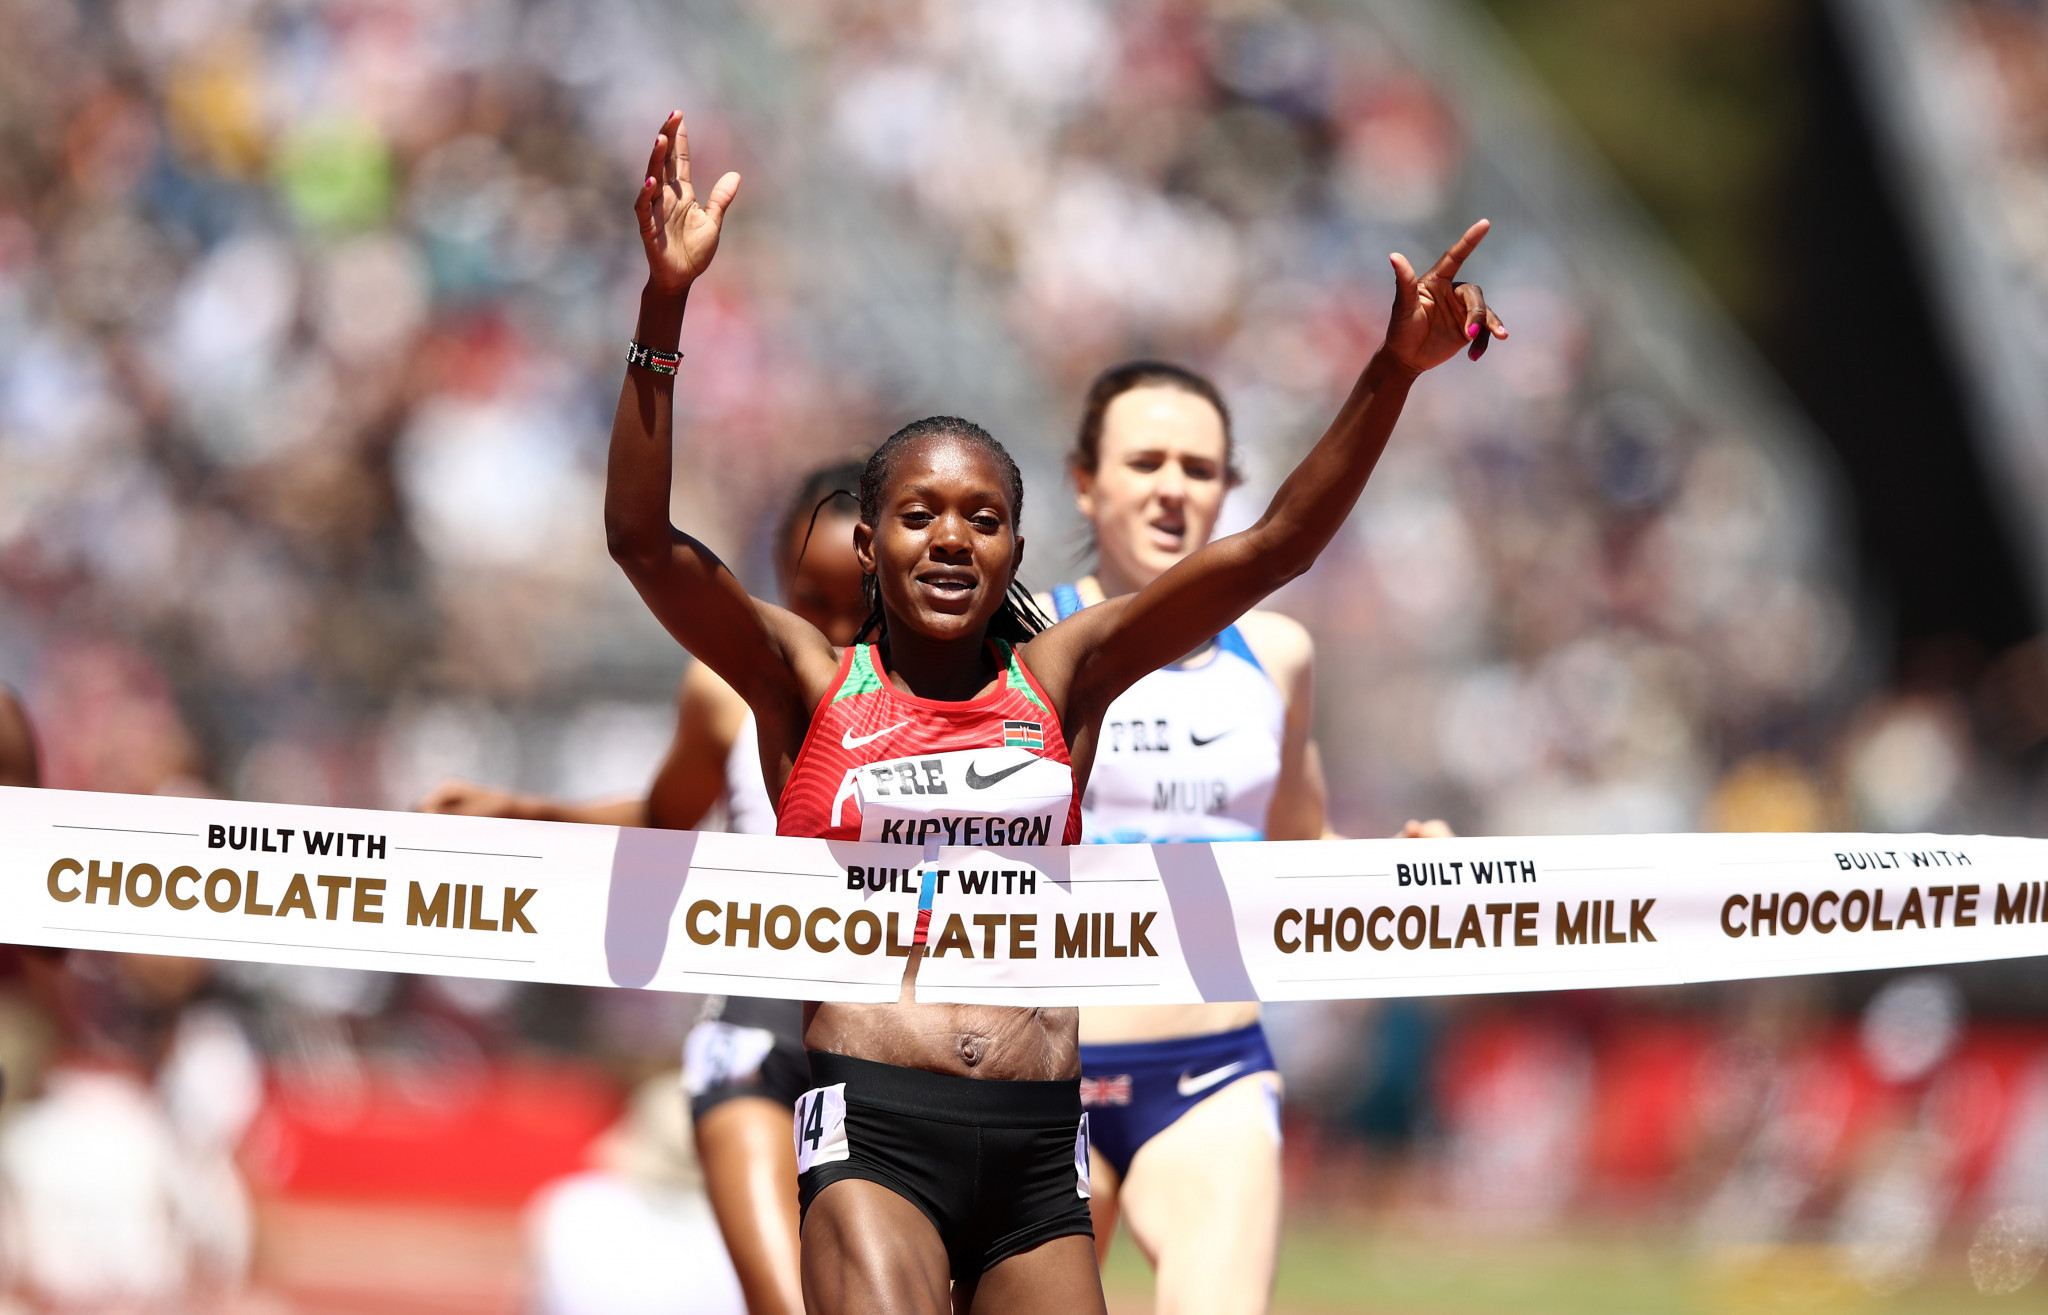 Kenya's Faith Kipyegon wins the 1500m at the IAAF Diamond League in Stanford, beating Britain's Laura Muir ©Getty Images